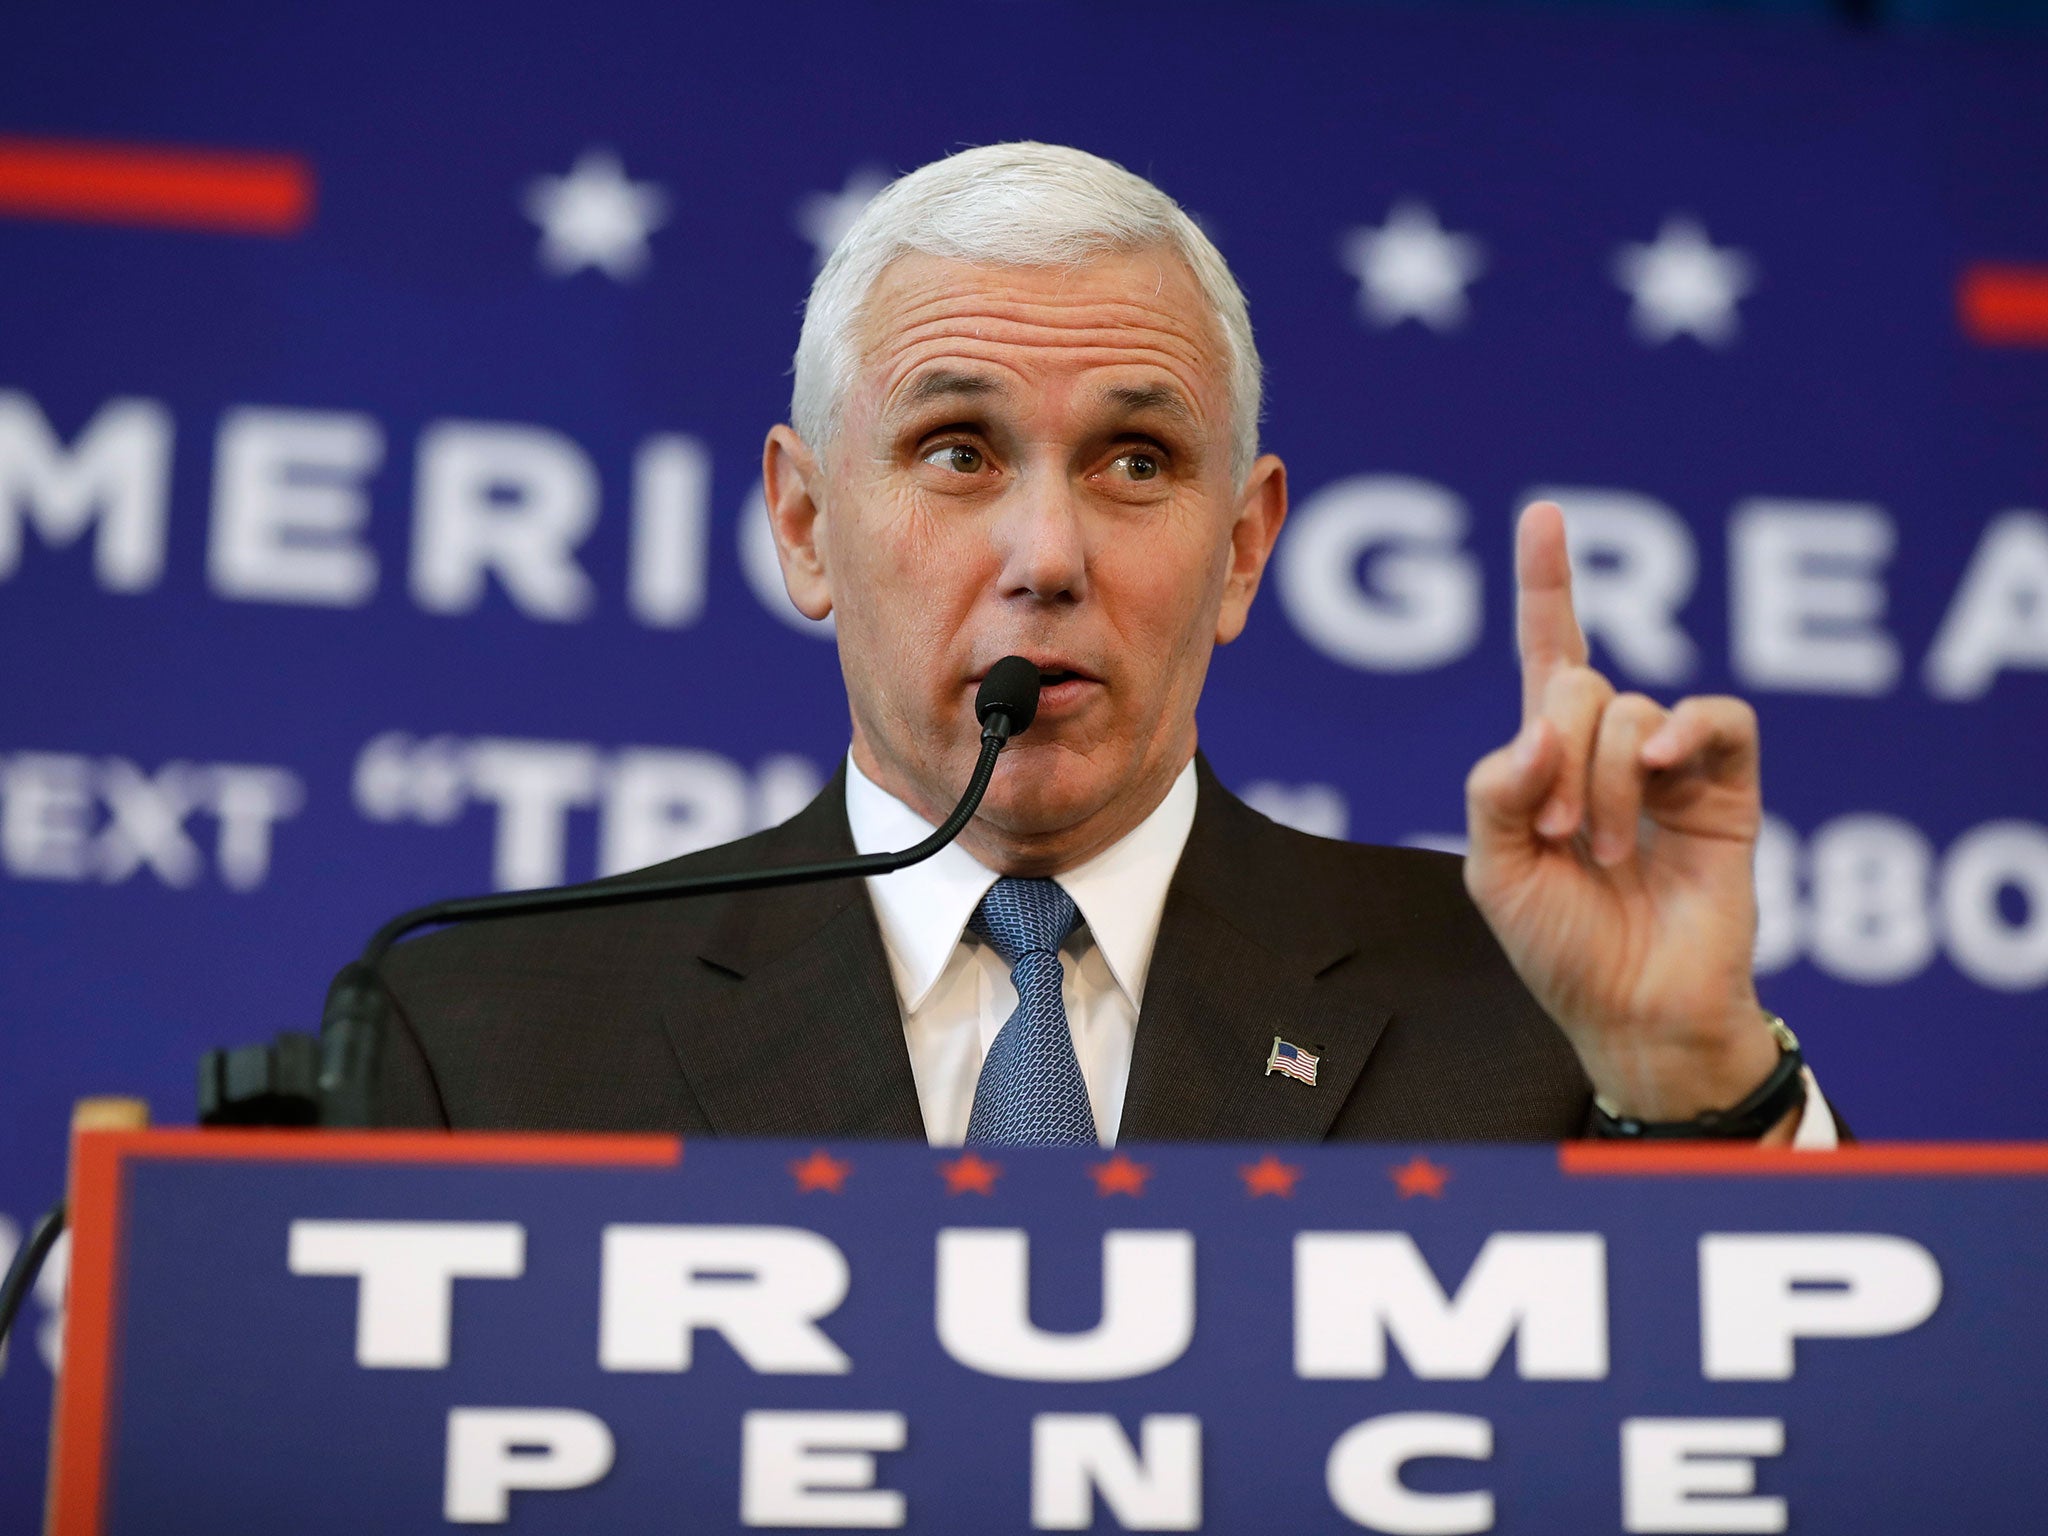 Many Republicans hoped the vice presidential candidate Mike Pence might force his running mate out of the way – but what relationship would the two have in office?